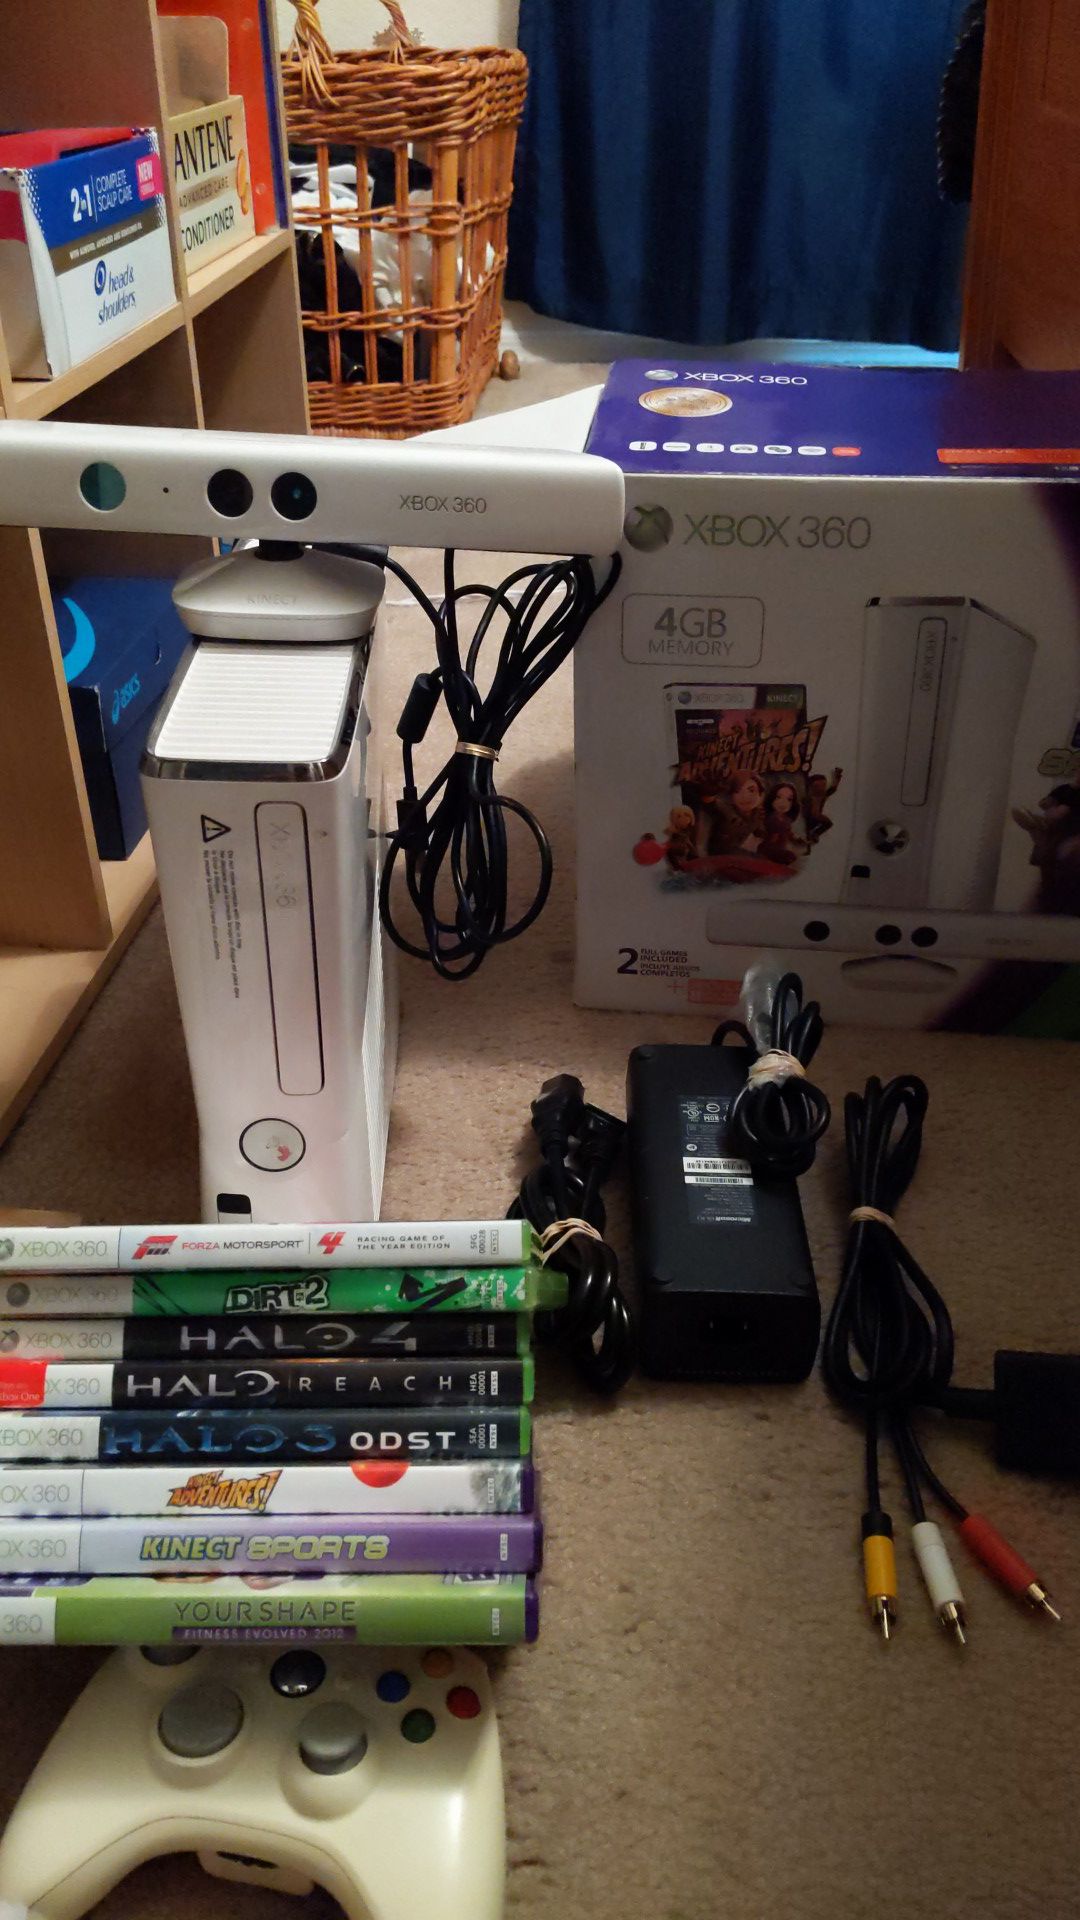 Xbox 360 SLIM/games 500 gb and come with original box I bought it in